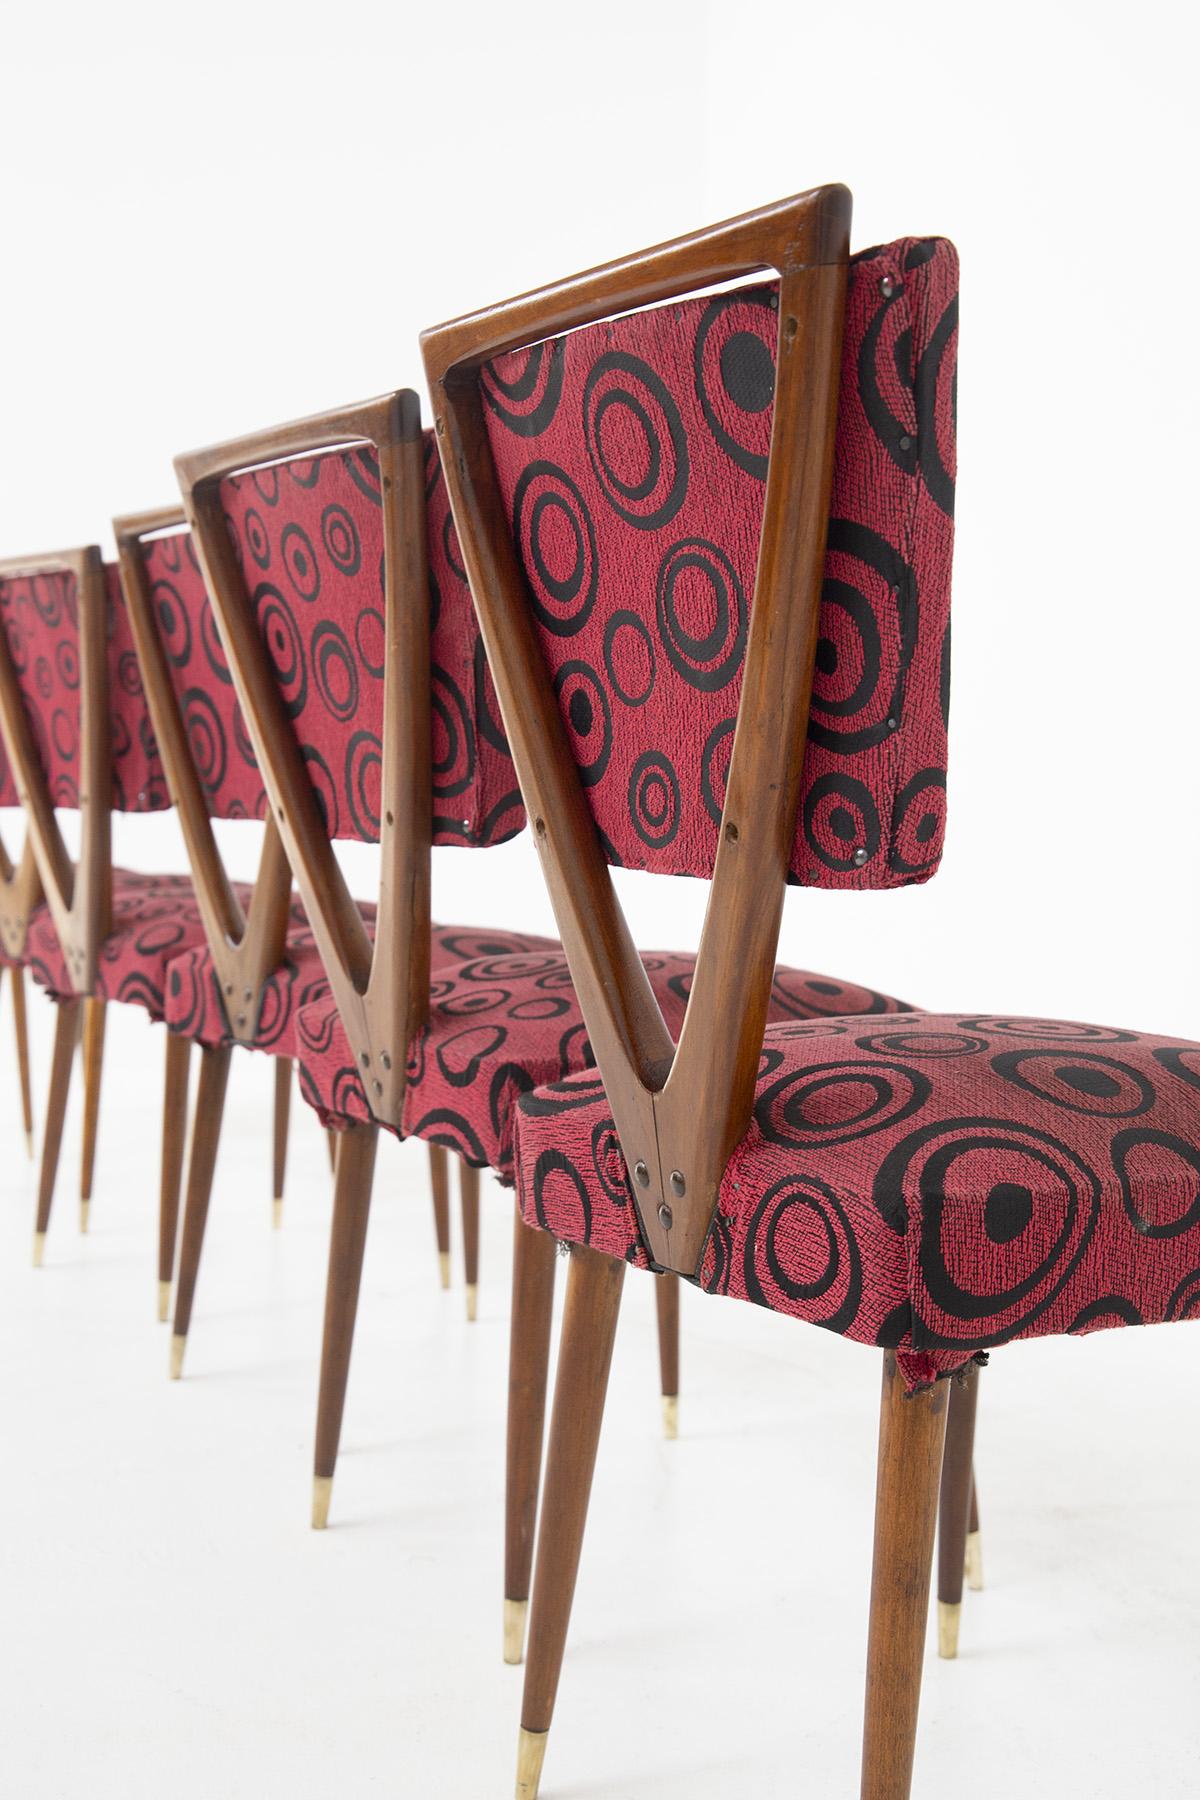 The set of six extravagant dining room chairs are design by Gianni Vigorelli in the ‘50s and are of fine Italian manufacture. 
The peculiar chairs have their original red fabric with a fun pattern of dark circles. The wooden structure is